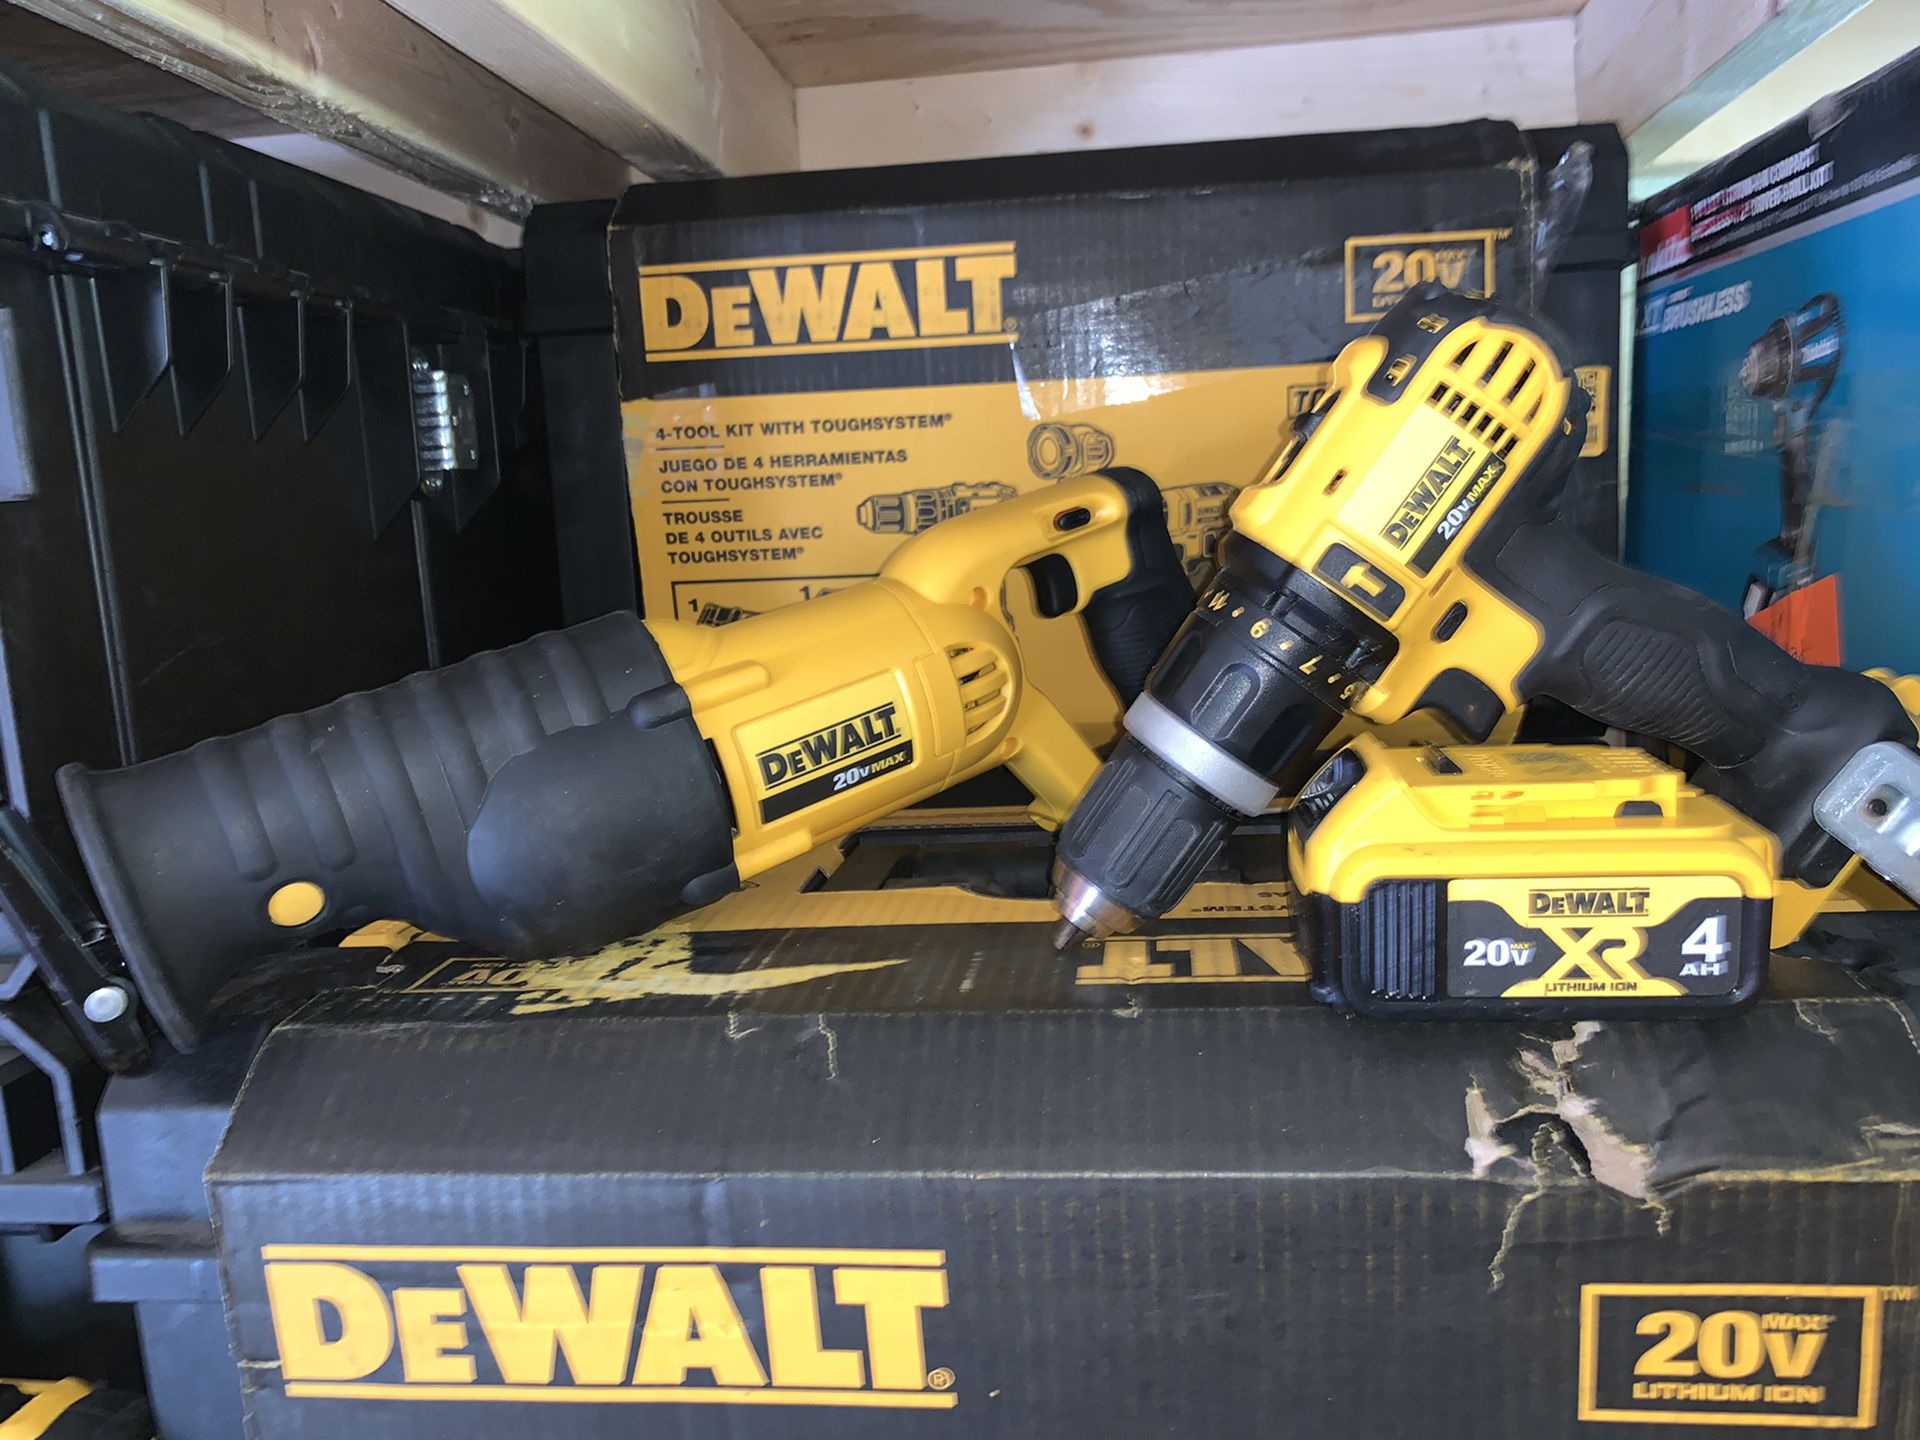 Dewalt hammer drill and saw Zaw 1 battery no charger firm price